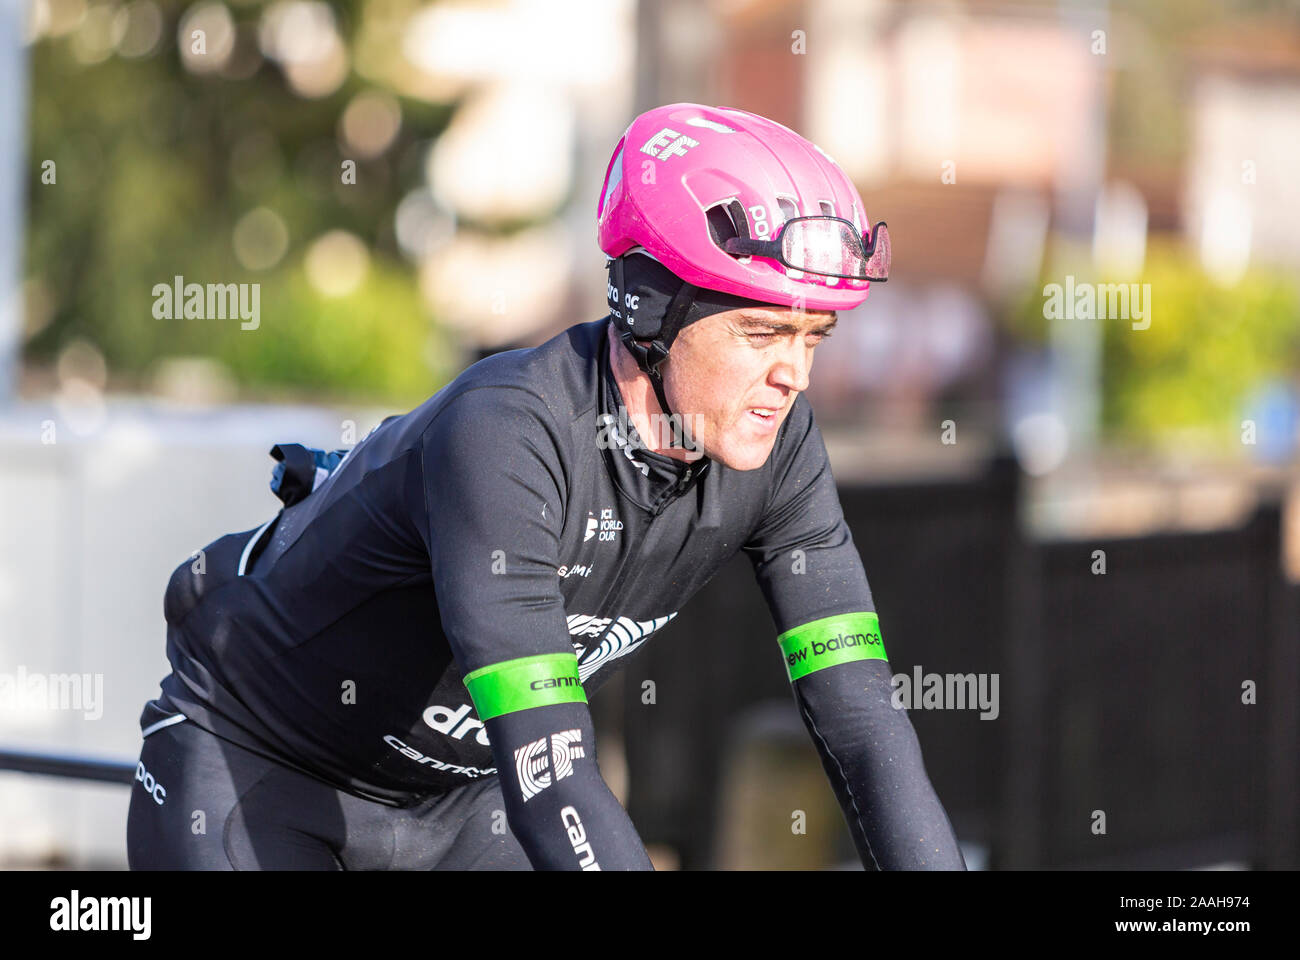 Meudon, France - March 4, 2018: The New Zealand cyclist Tom Scully of  Team EF Education First-Drapac Cannondale riding during Paris-Nice 2018. Stock Photo